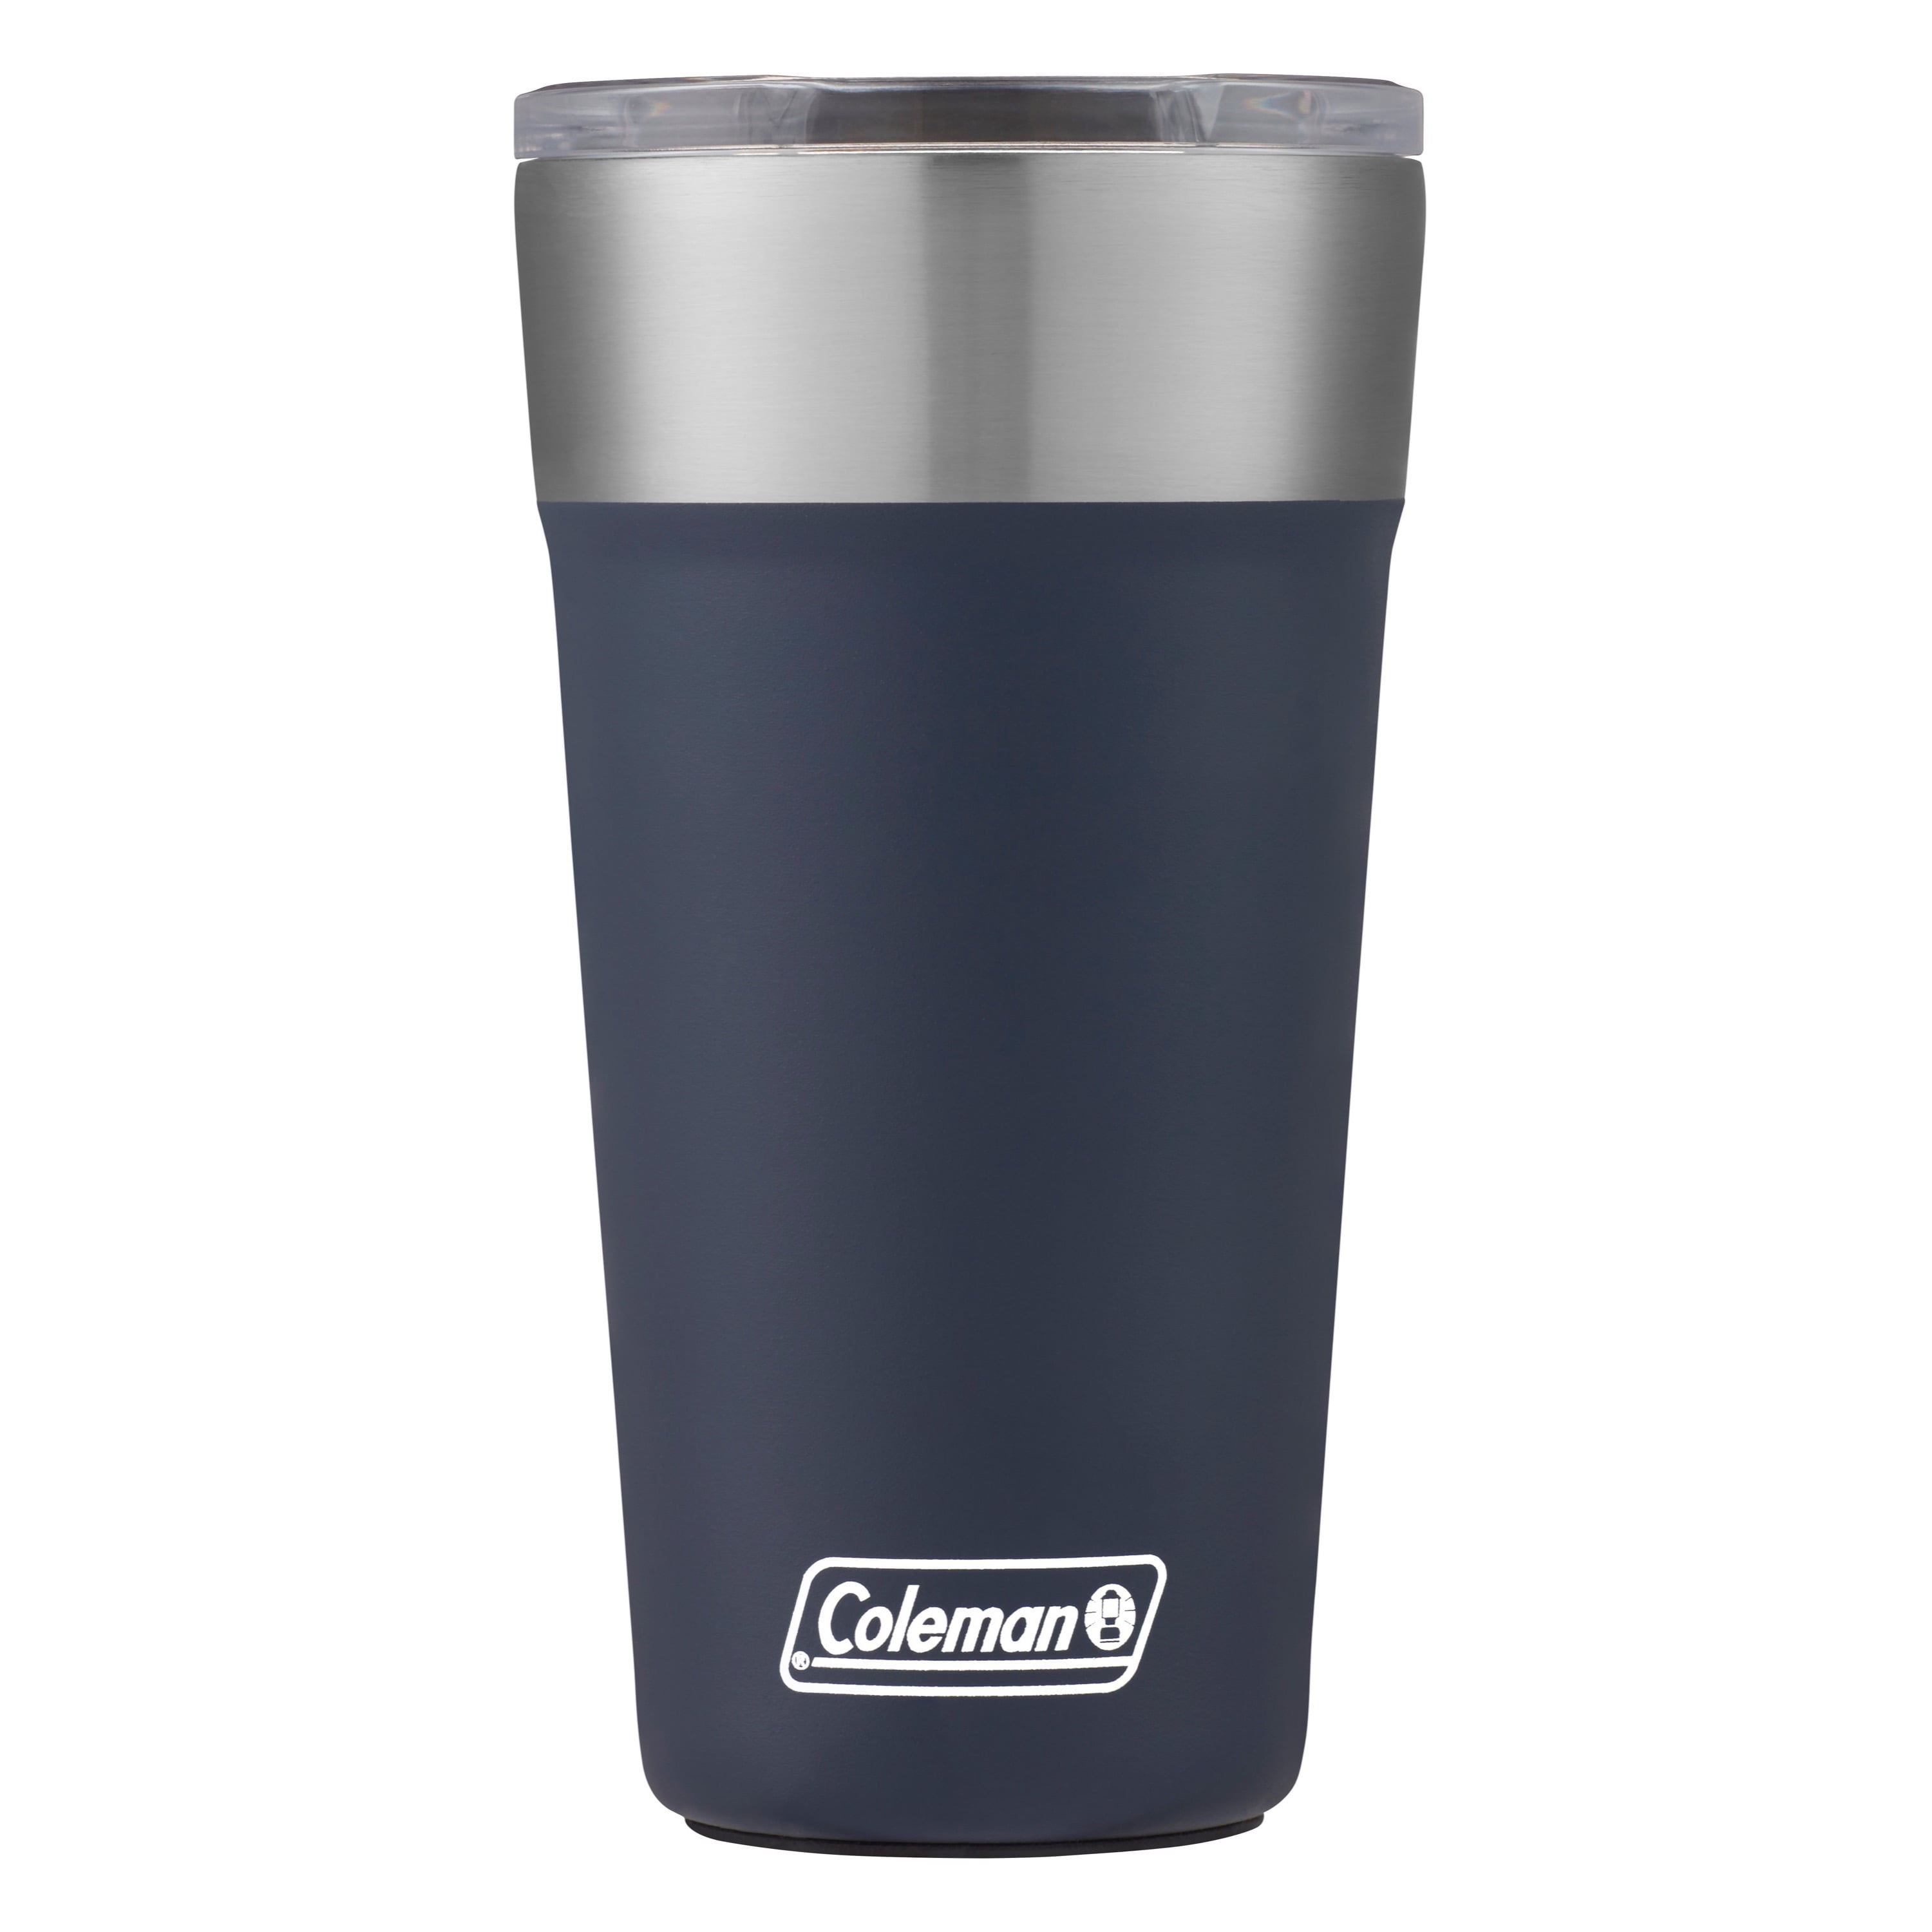 Coleman Brew Insulated Stainless Steel Tumbler, 20 oz., Blue Nights